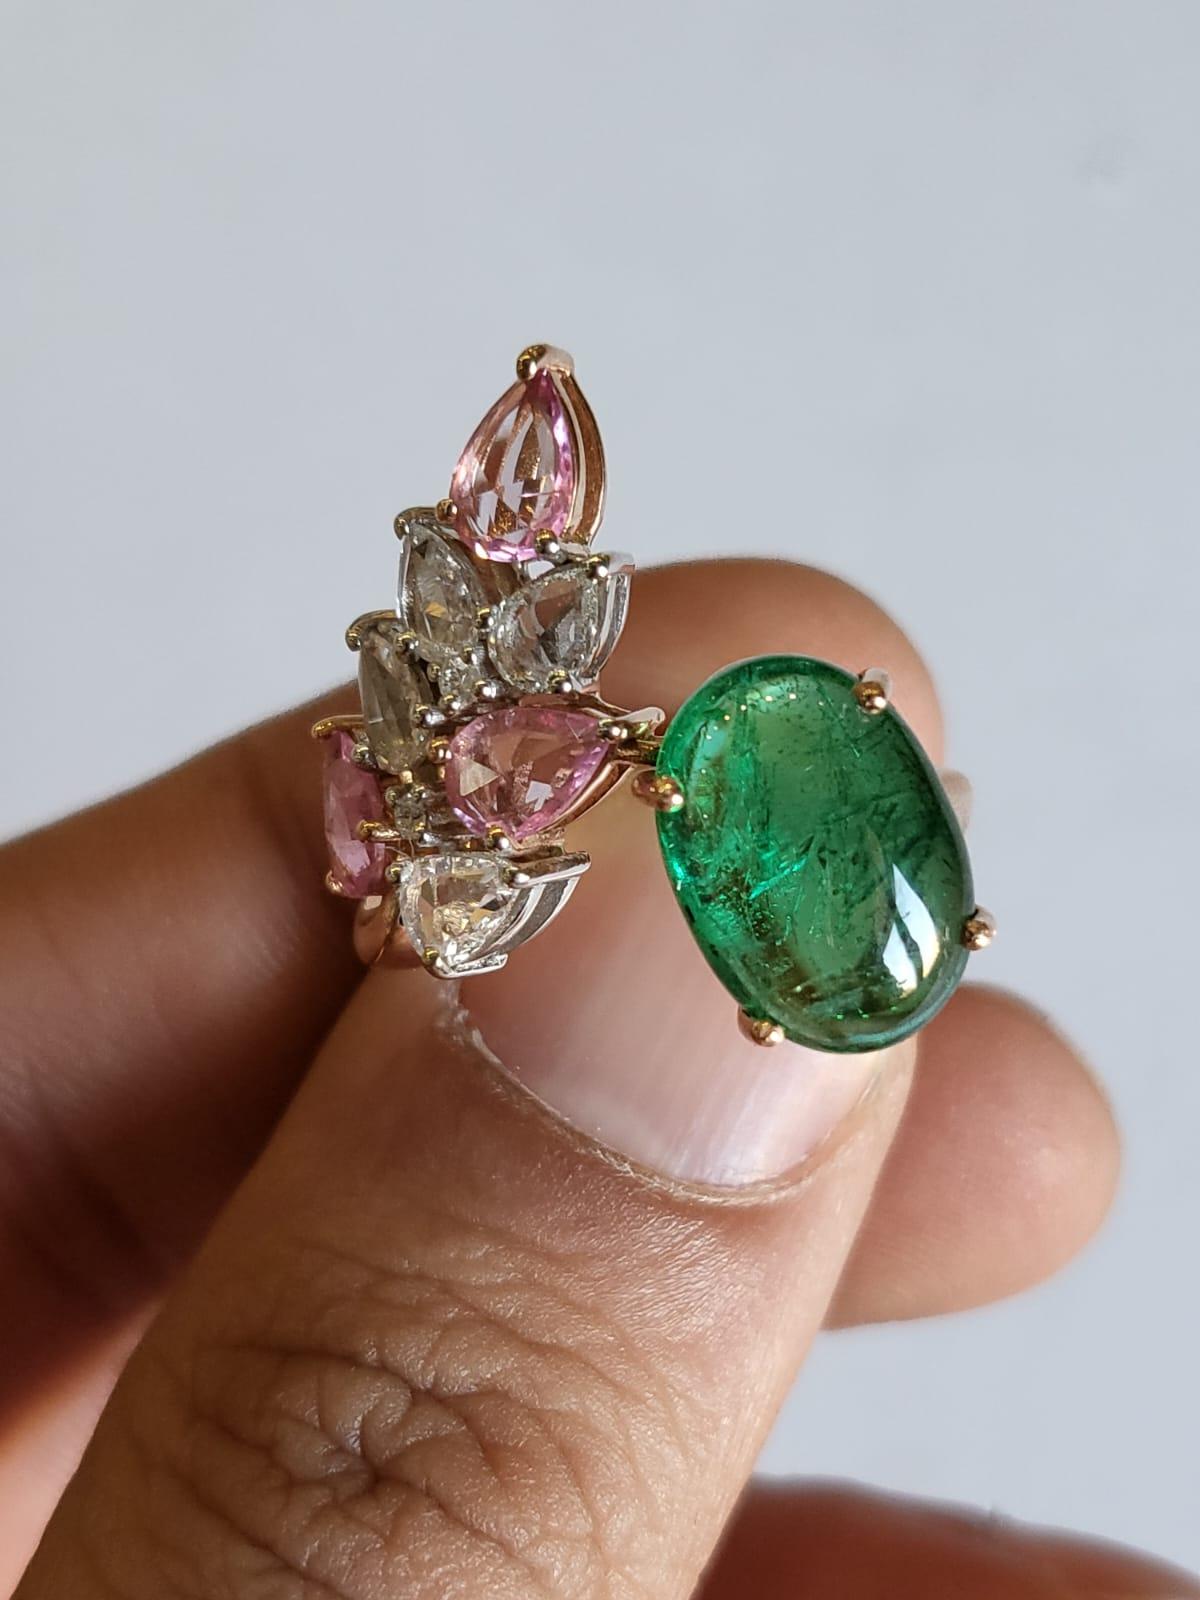 A very gorgeous and one of a kind, Emerald & Pink Sapphire Cocktail Ring set in 18K Rose Gold & Diamonds. The weight of the Emerald cabochon is 4.27 carats. The Emerald is completely natural, without any treatment and is of Zambian origin. The